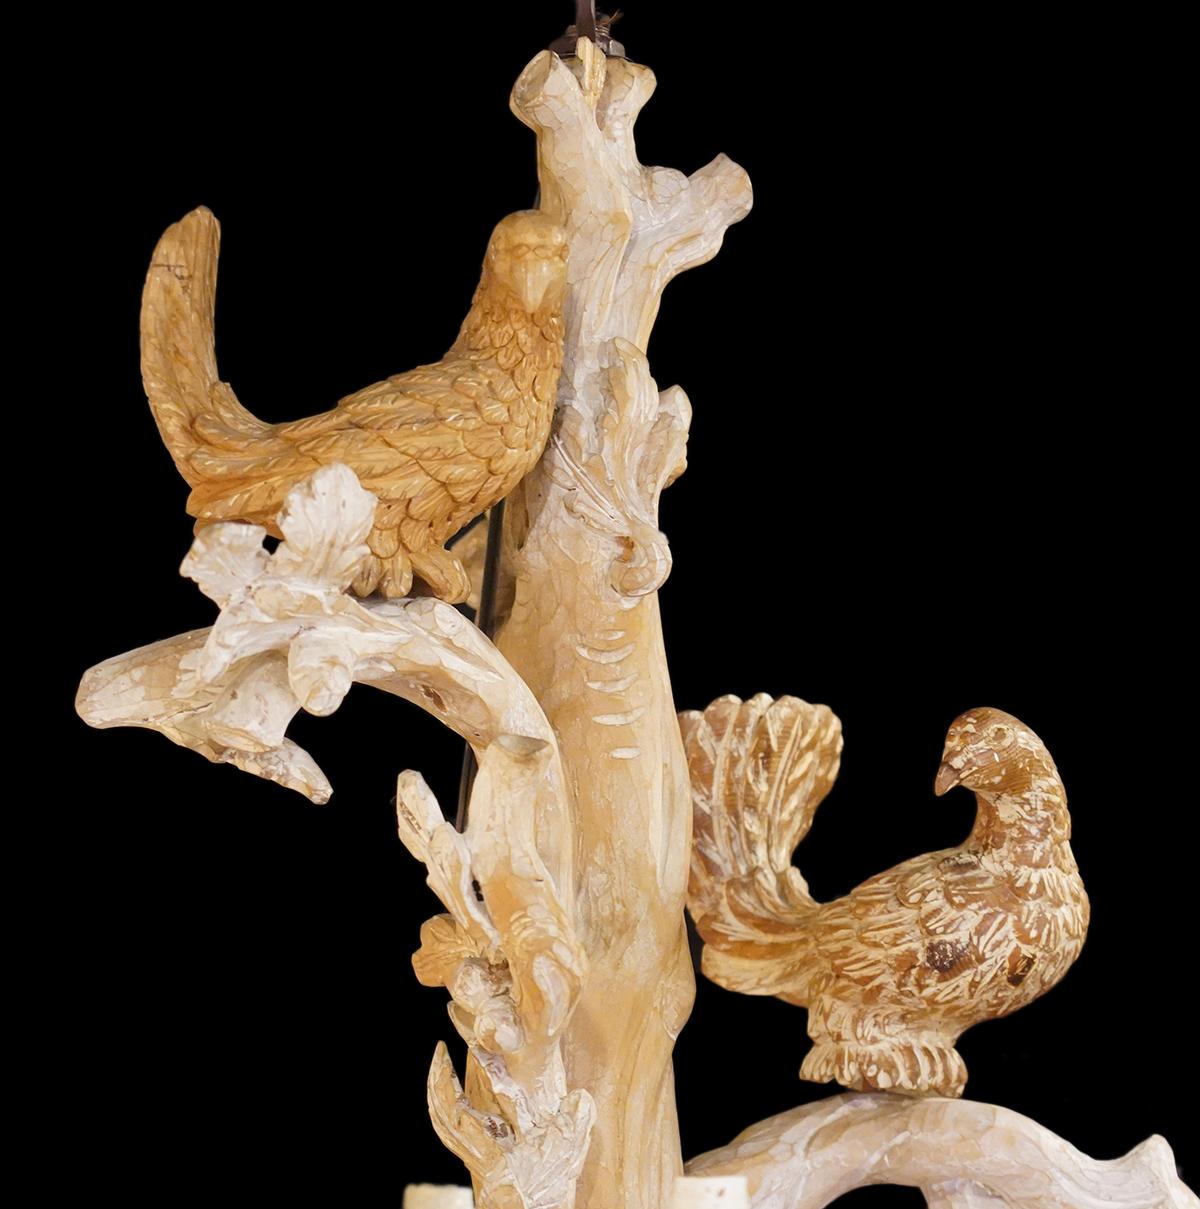 48 inches tall and elaborately carved in the natural style with branches, oak leaves, acorns etc. this striking Italian chandelier also features two doves romantically perched on the upper branches. The blonde wood is attractively washed with chalky